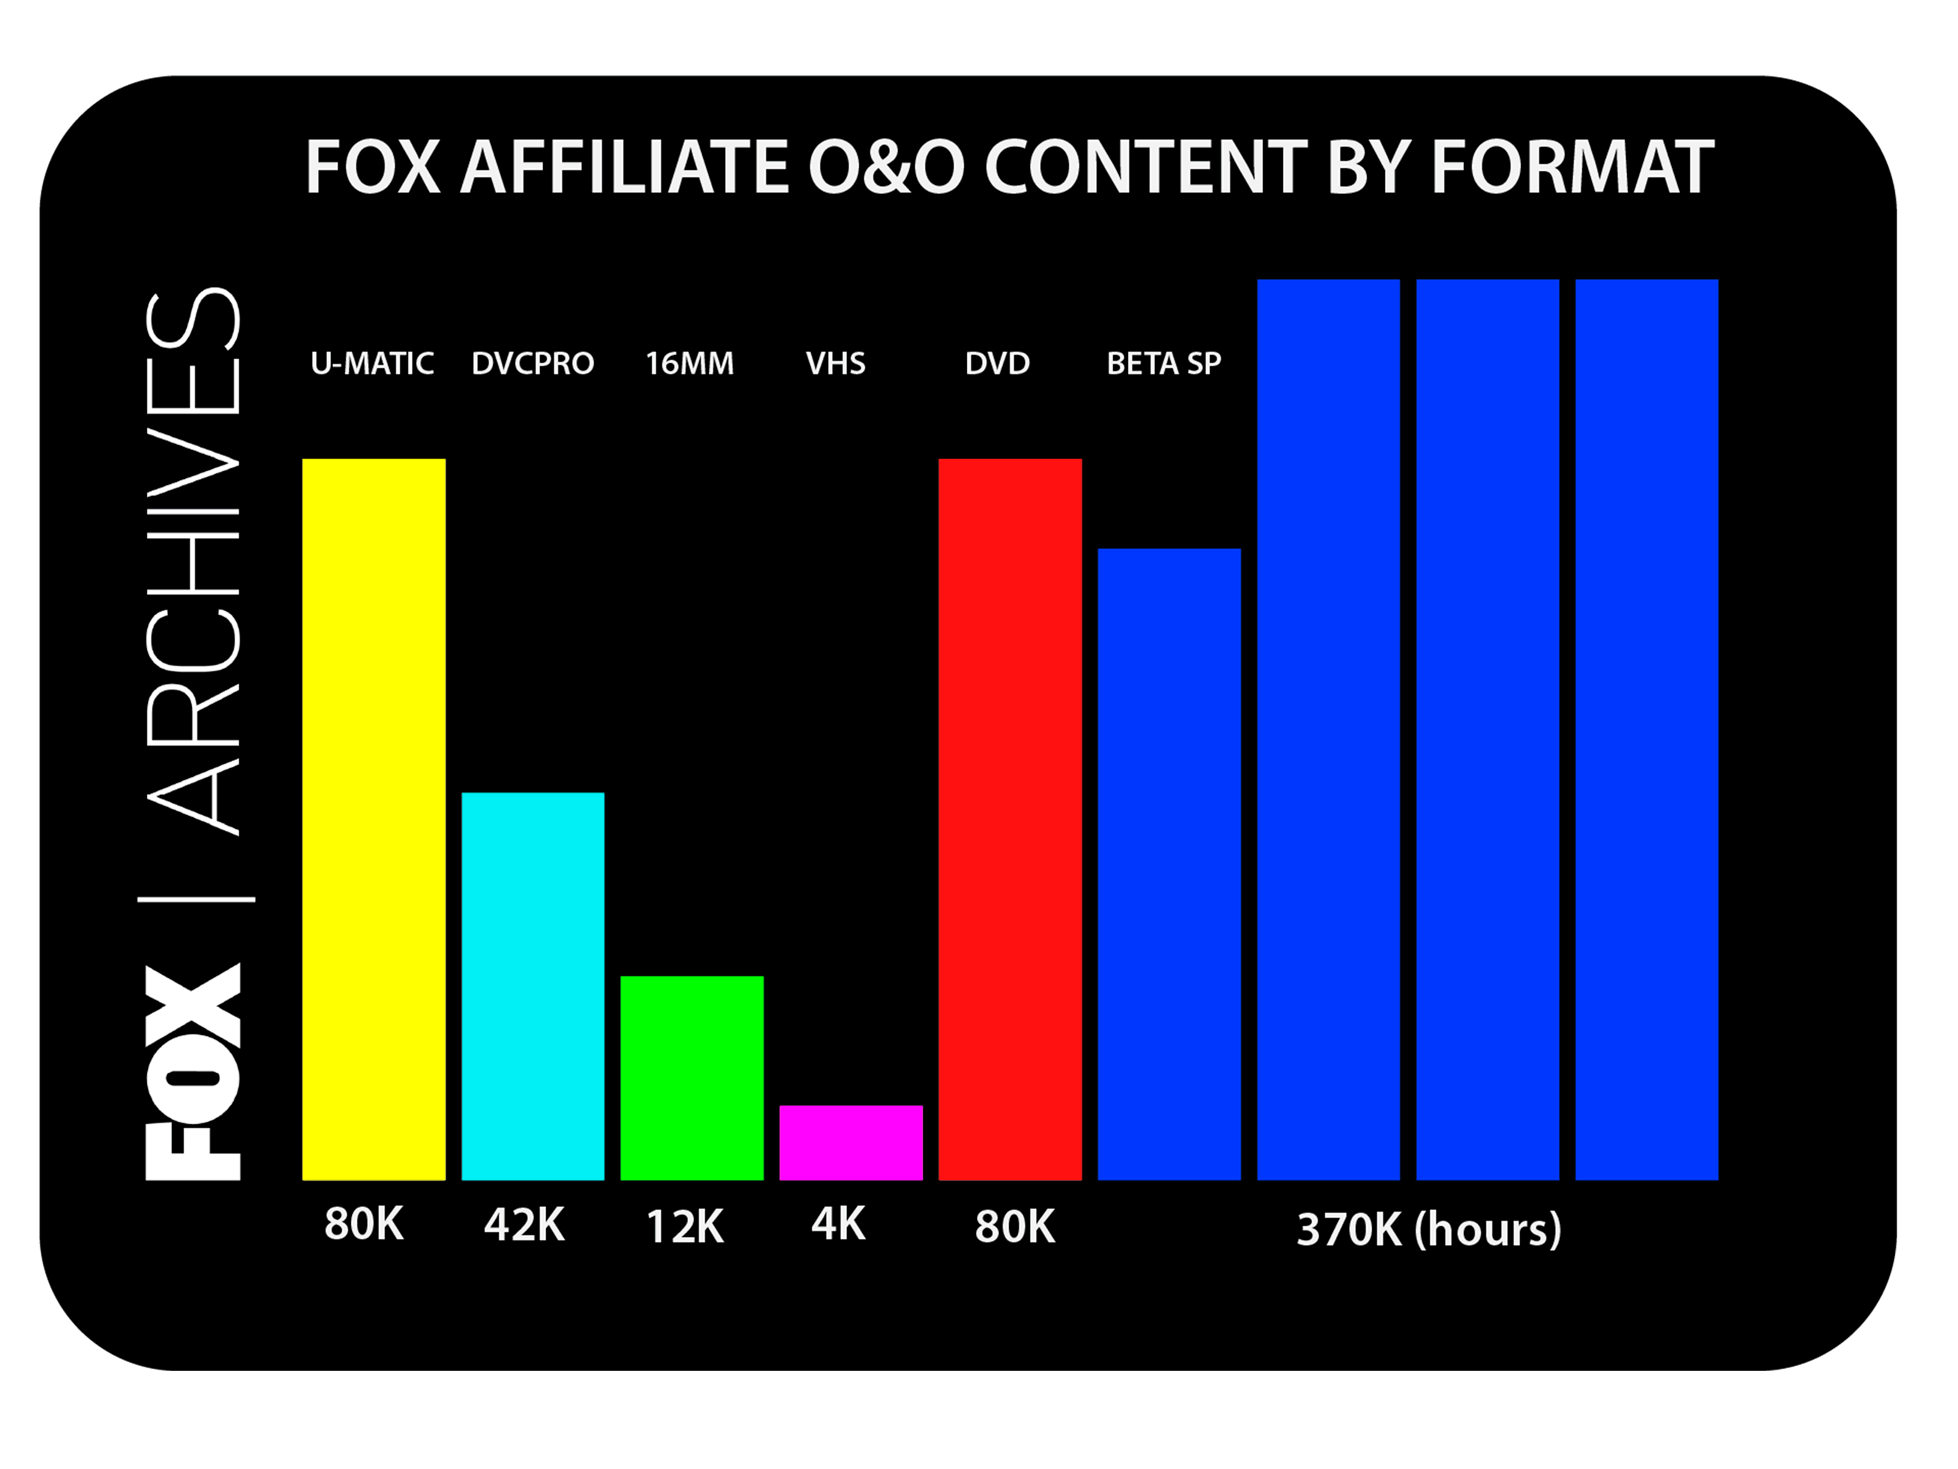 Graph showing fox's archive footage